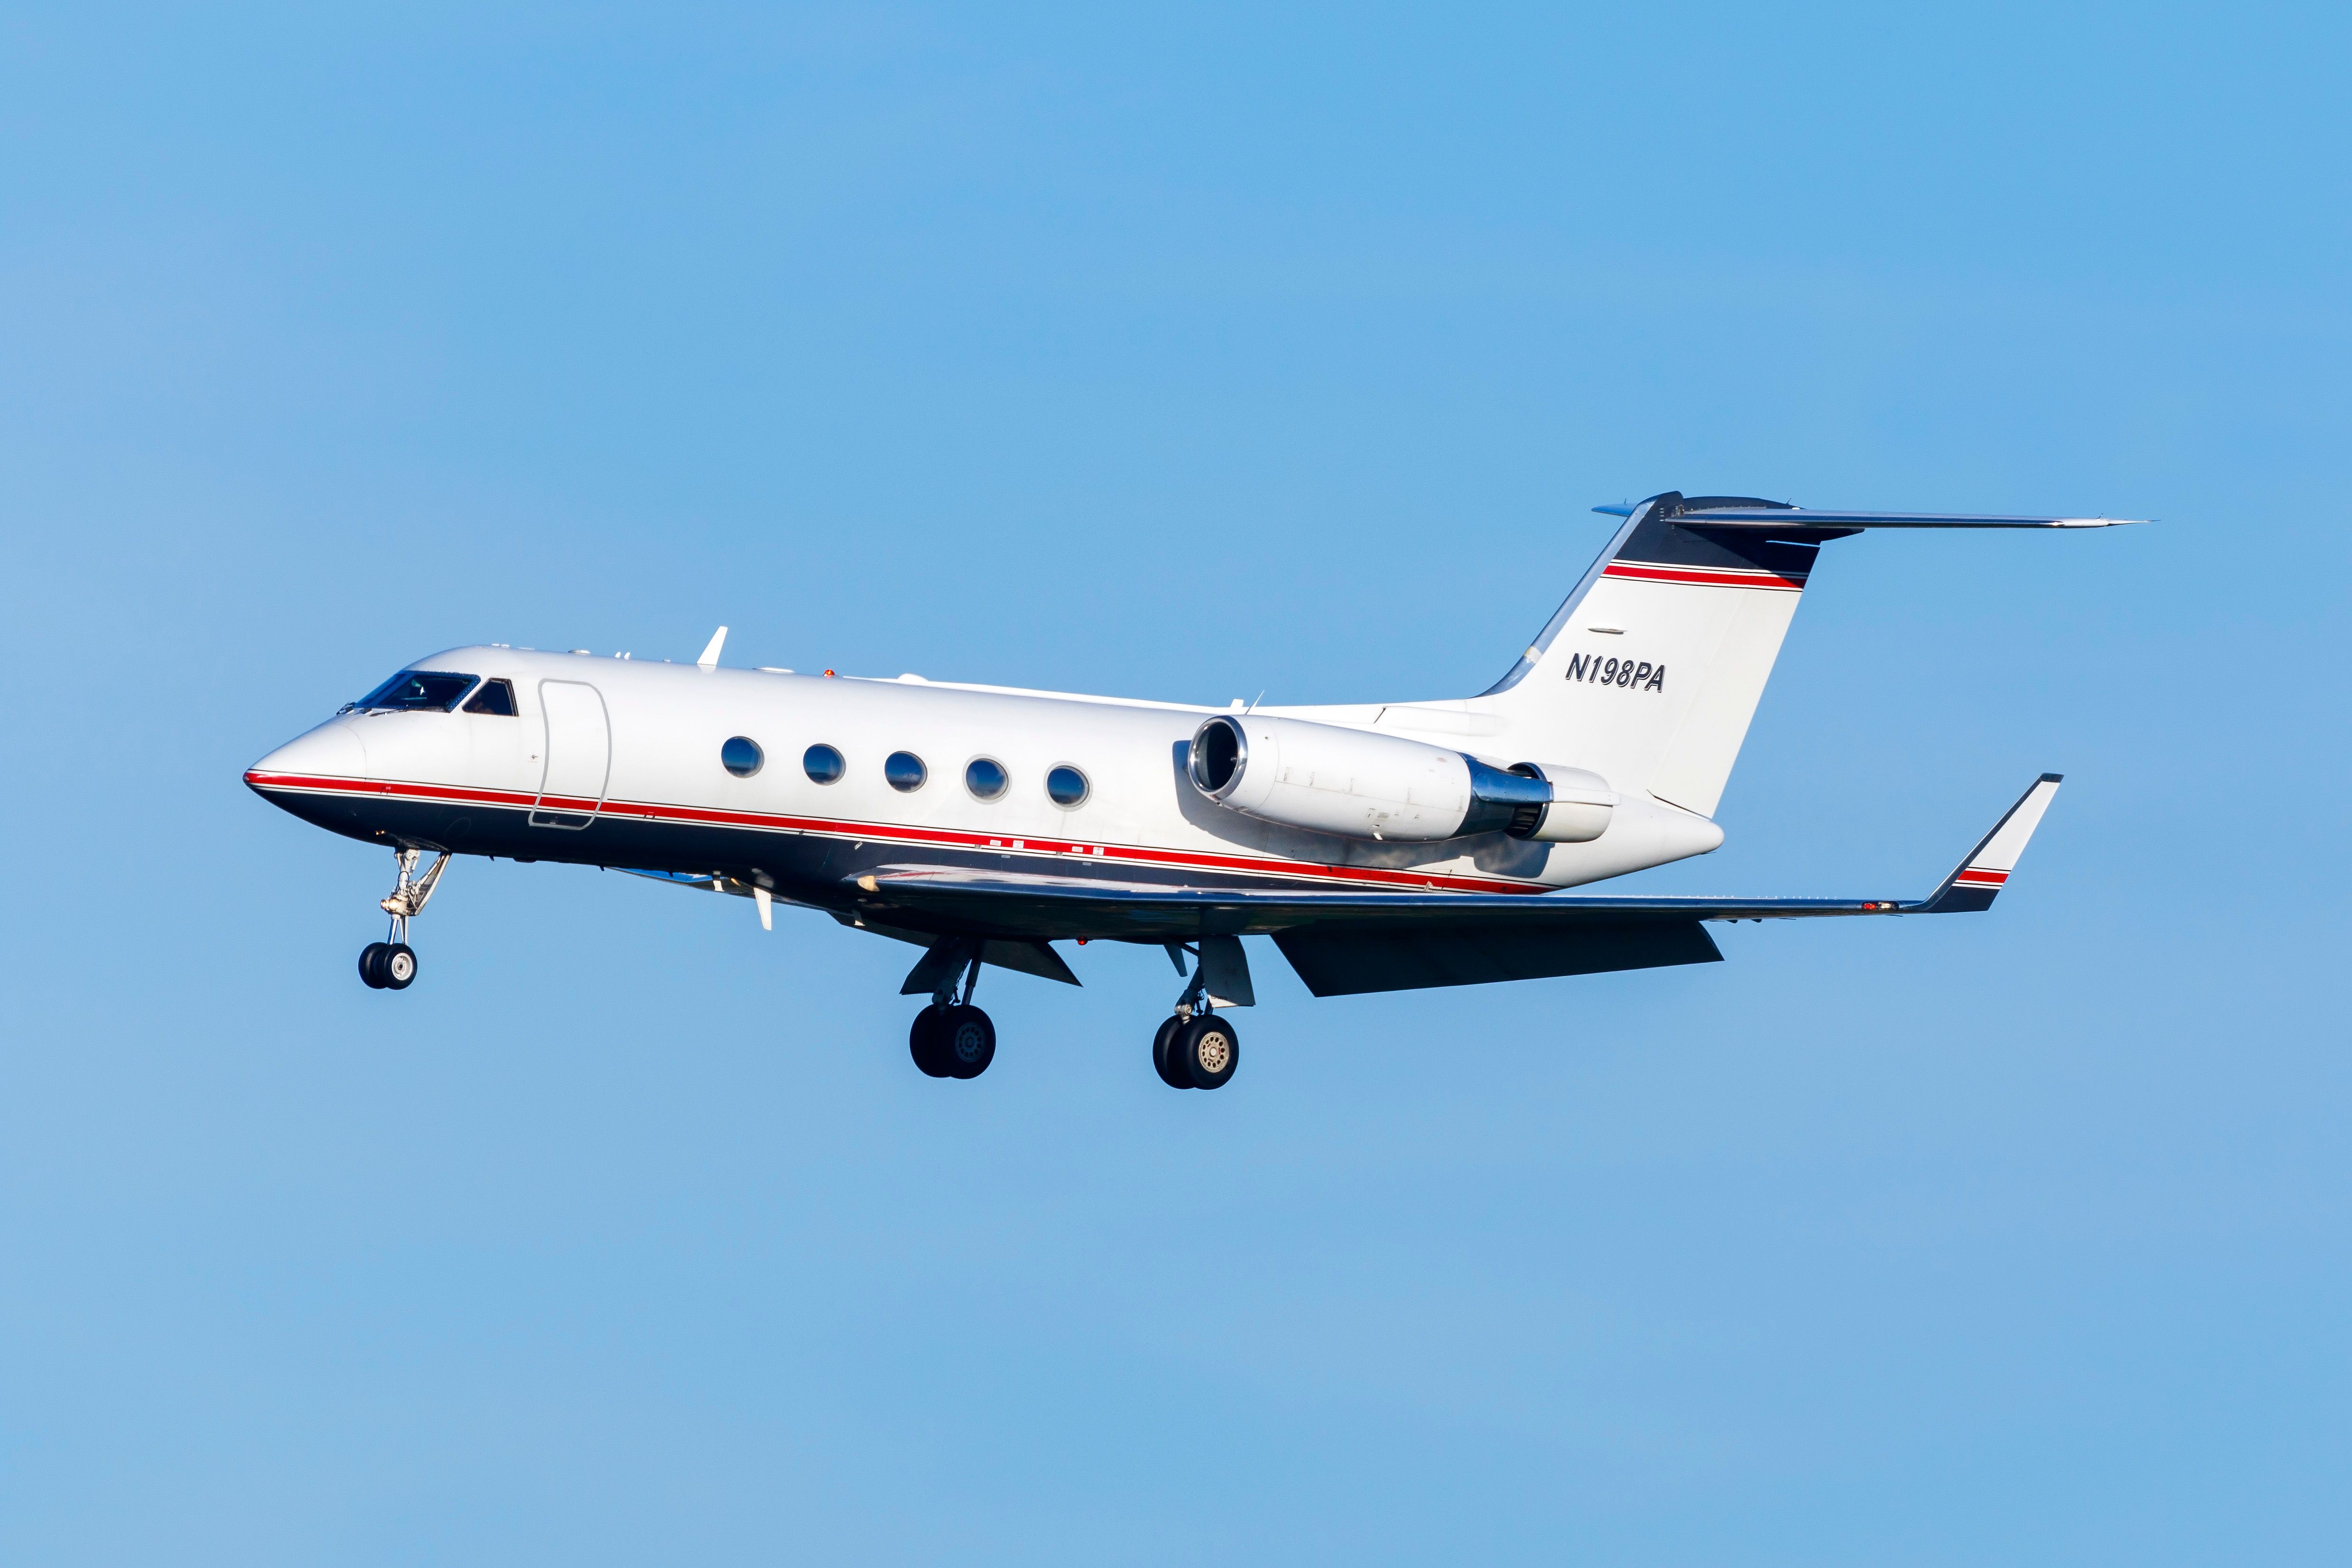 A Gulfstream G-III business jet flying in the sky.